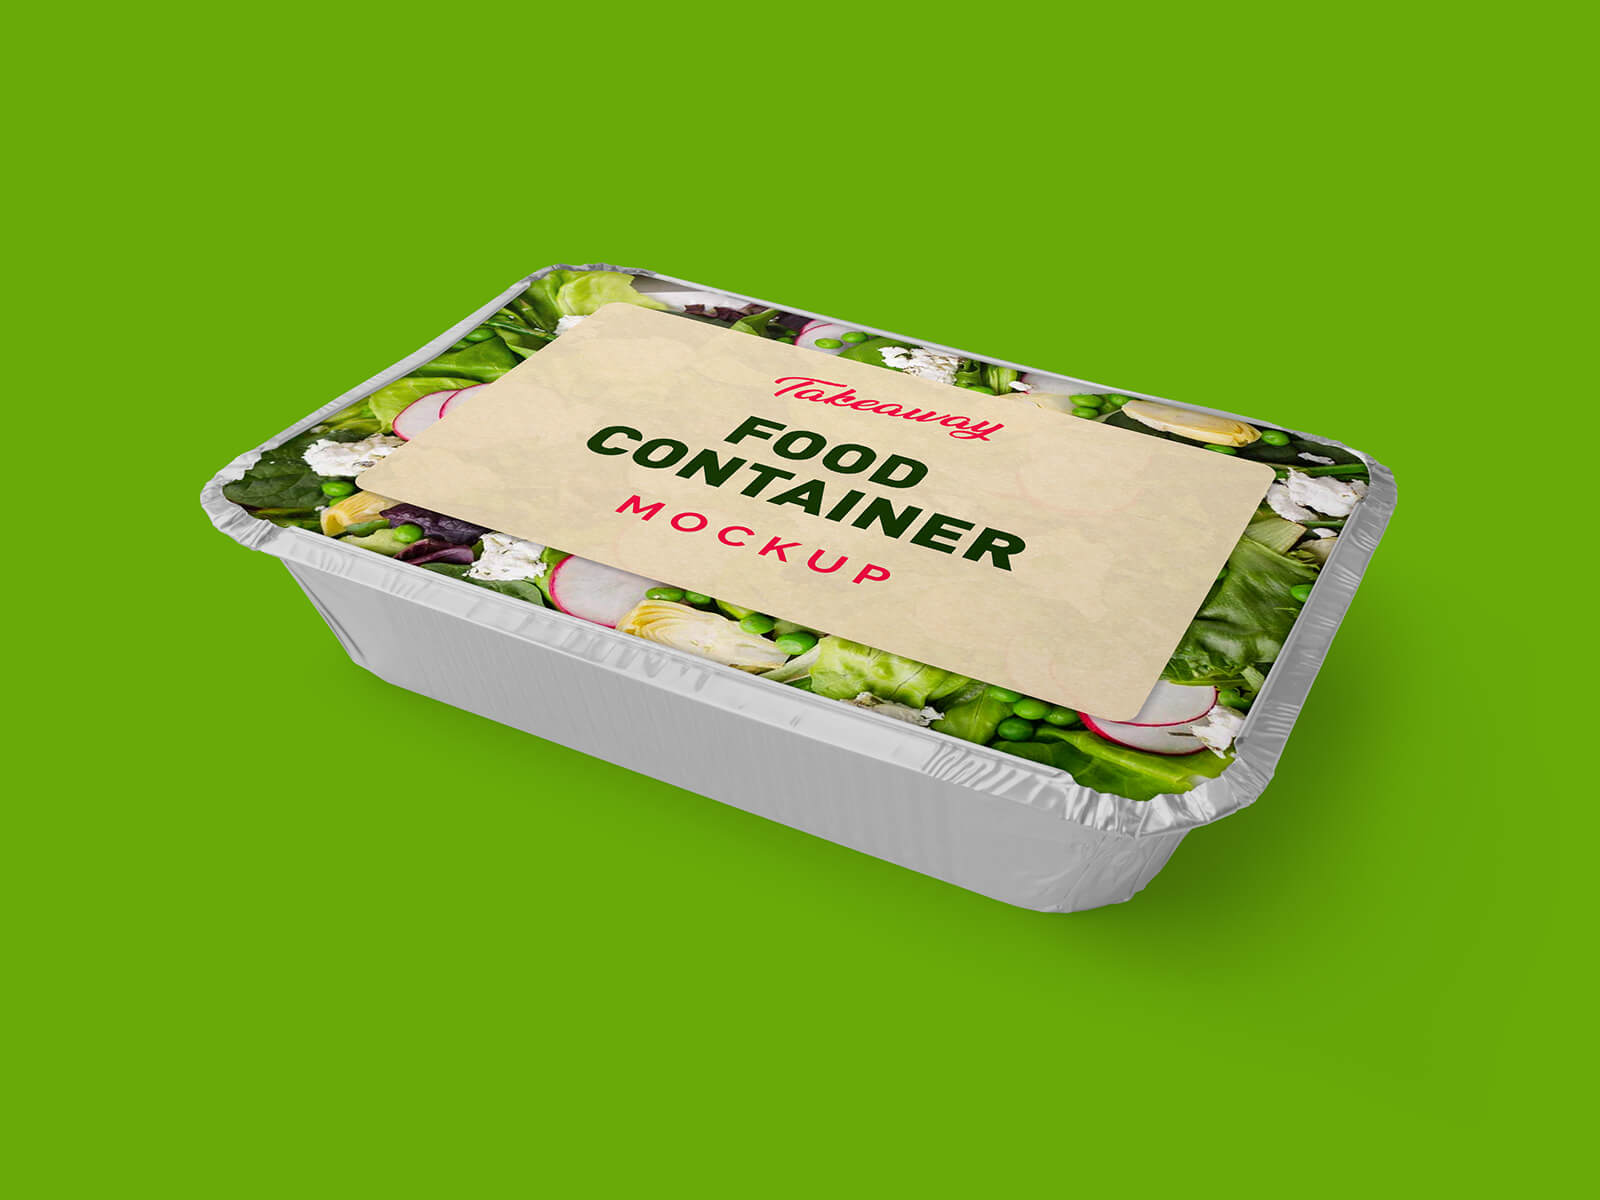 Free Takeaway Food Delivery Container Mockup PSD